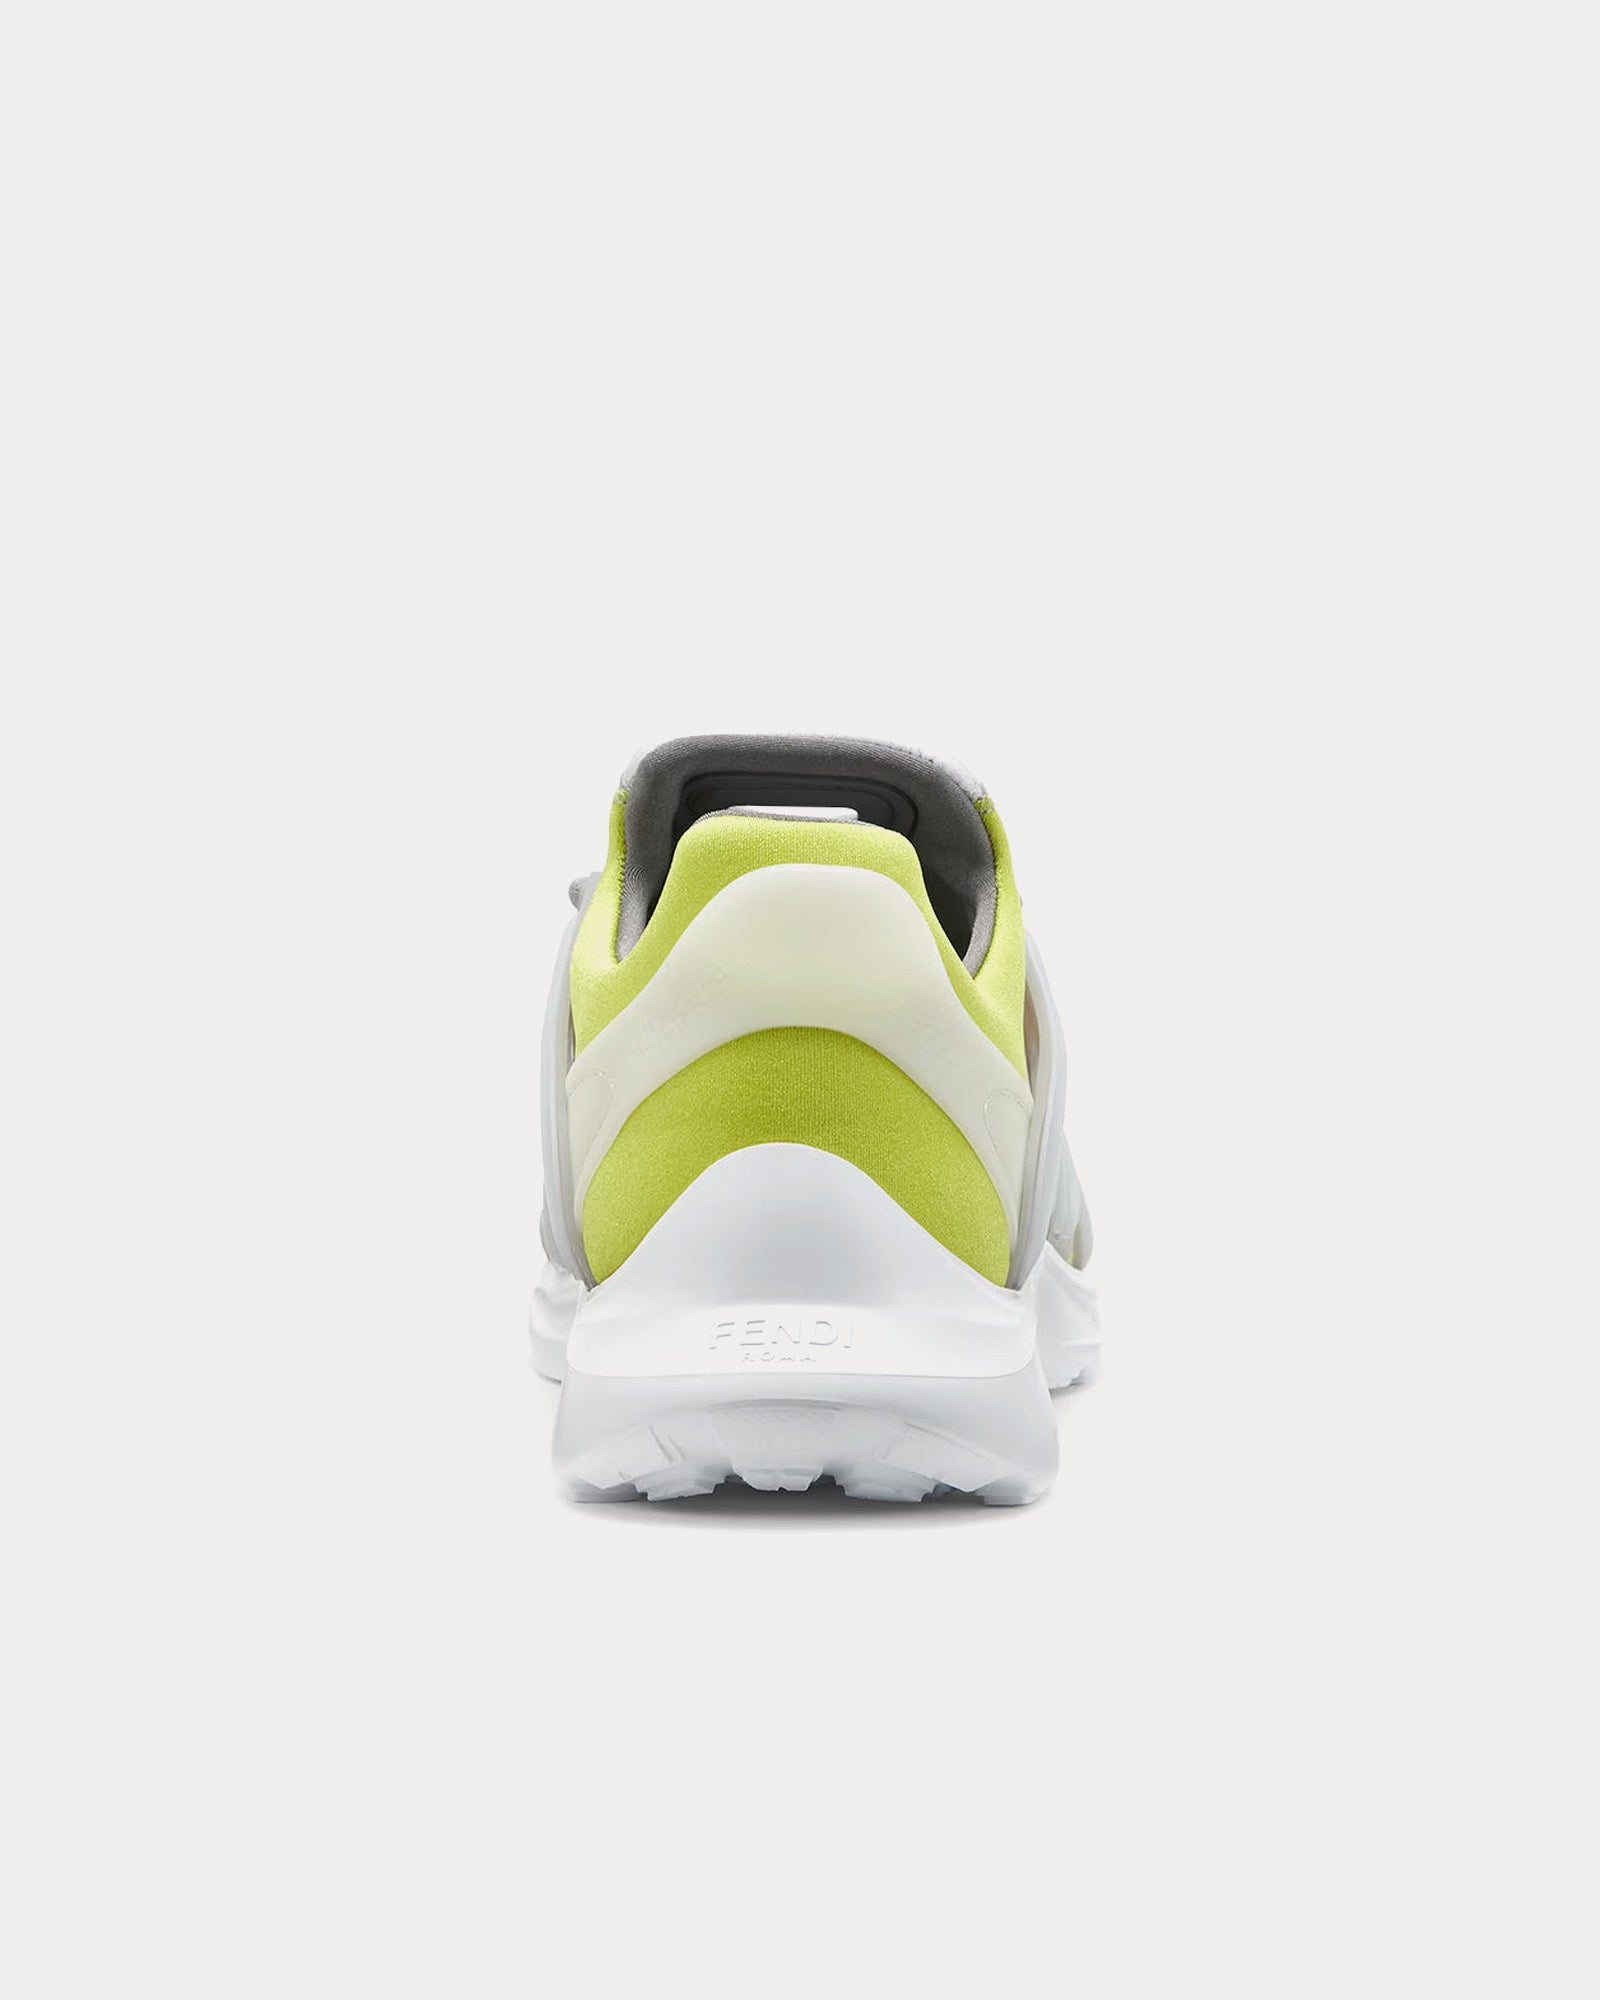 Fendi - Tag Technical Mesh Yellow Low Top Sneakers